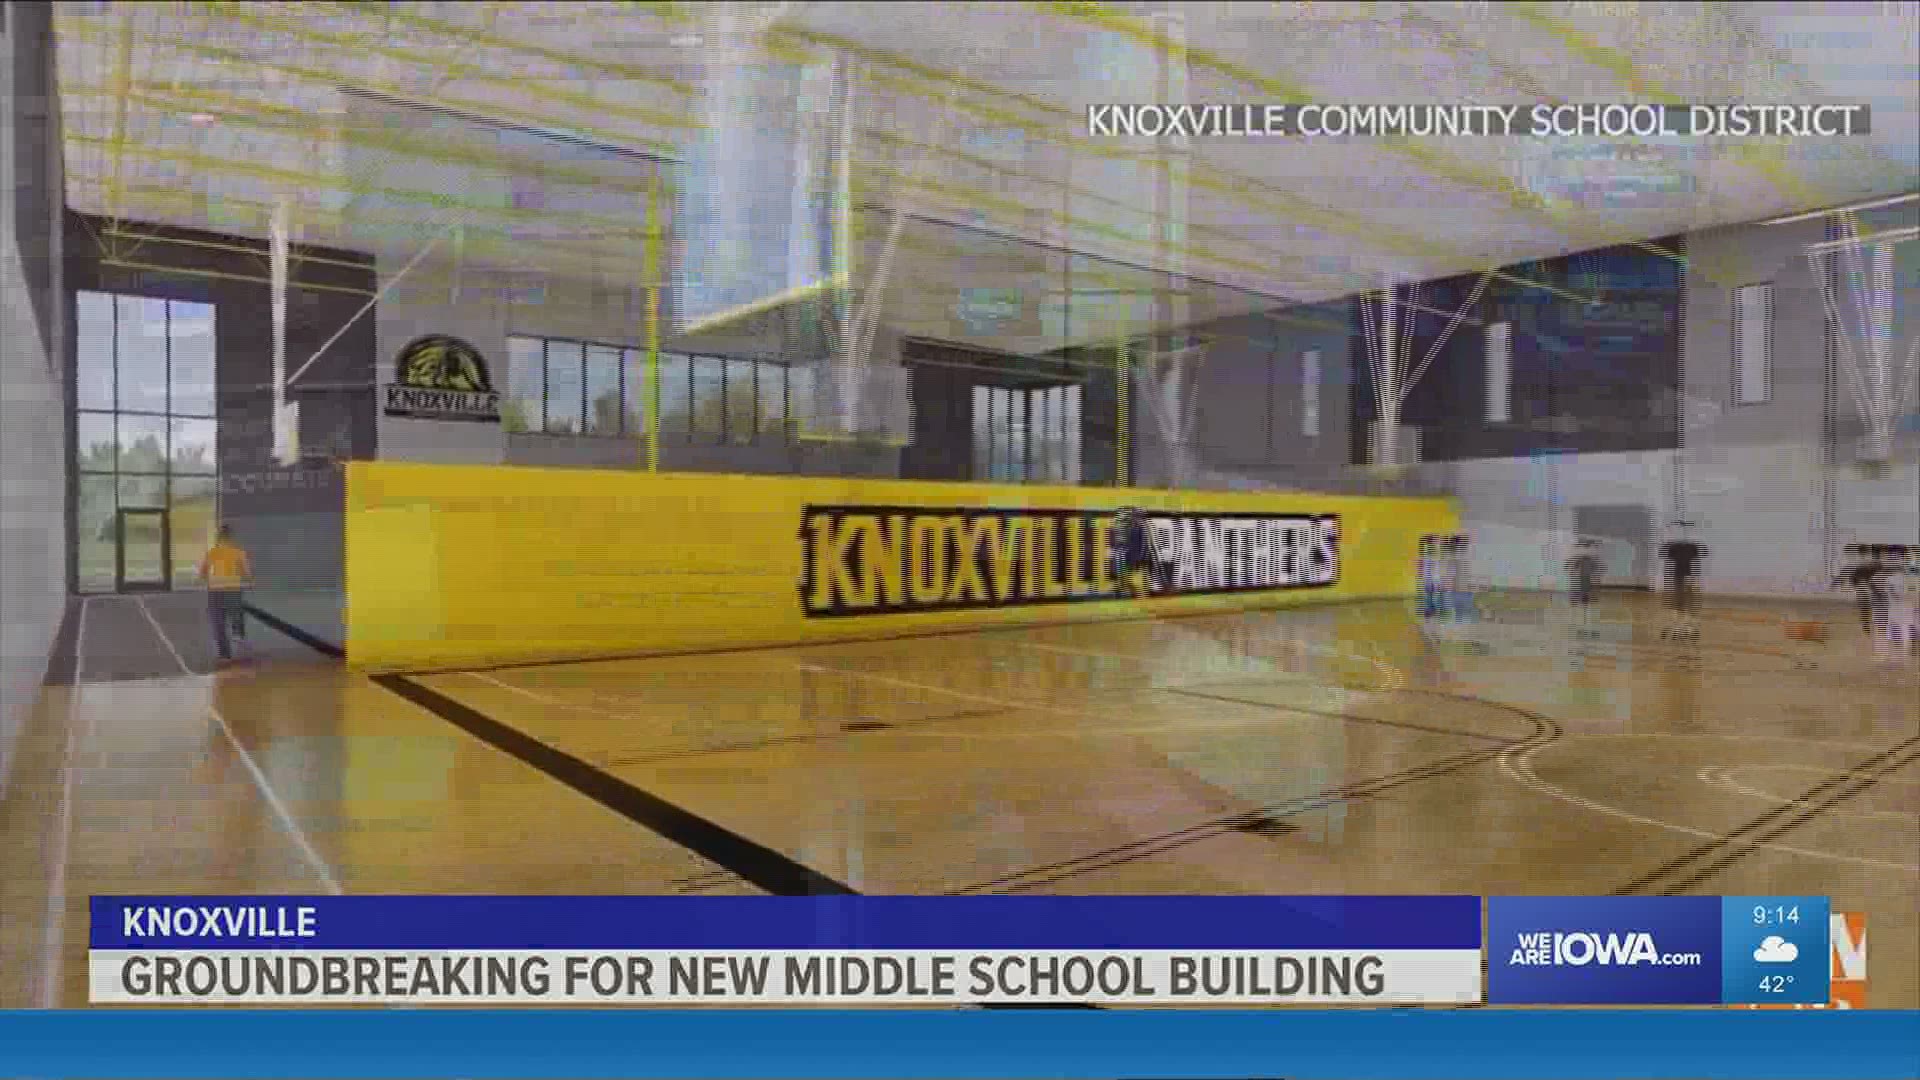 Construction on the new middle school building is expected to be completed by fall 2022.